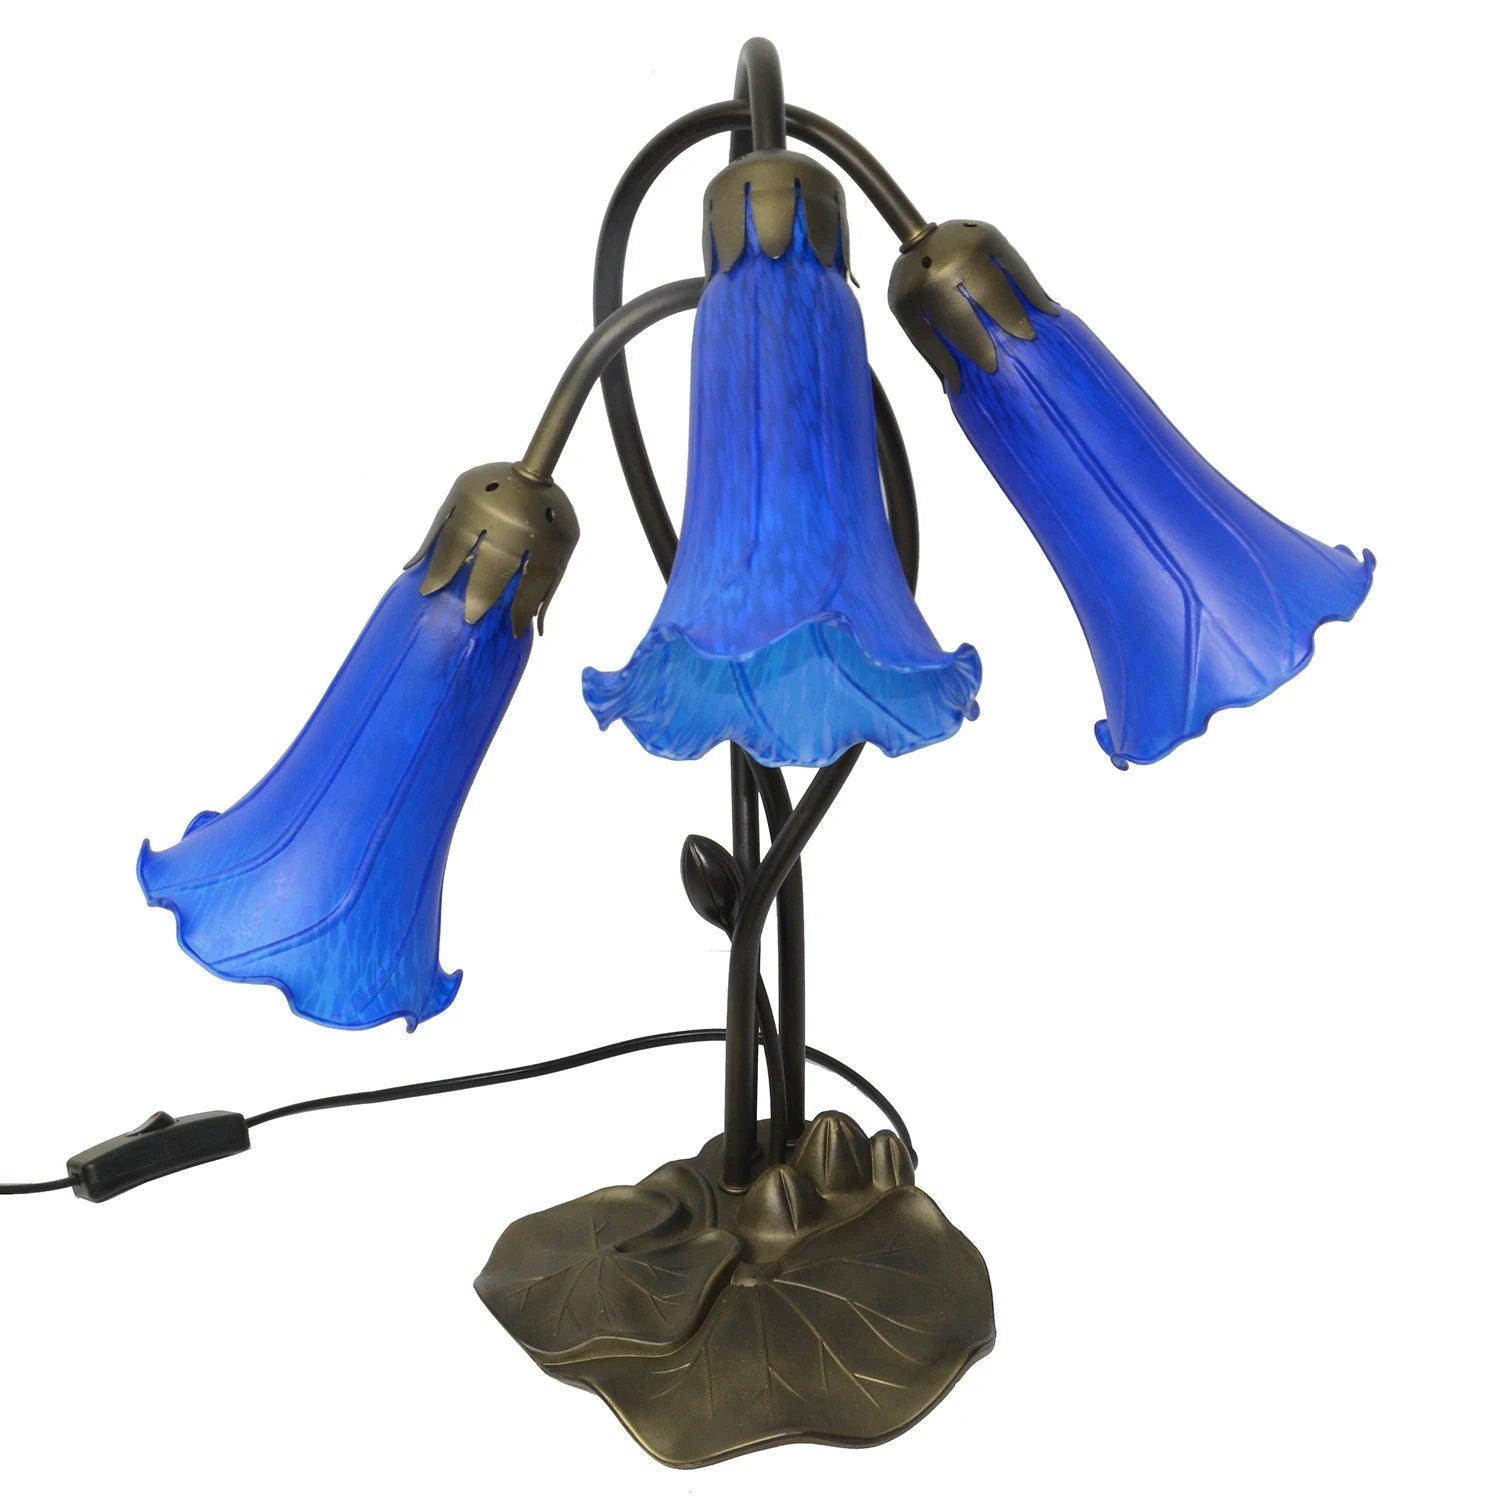 Pond Lily Lamp Shade Blue Glass Lampshade 4.5" Wide X 6" Tall X 1.5" Fitter Lighting Accessories - Specialty Shades